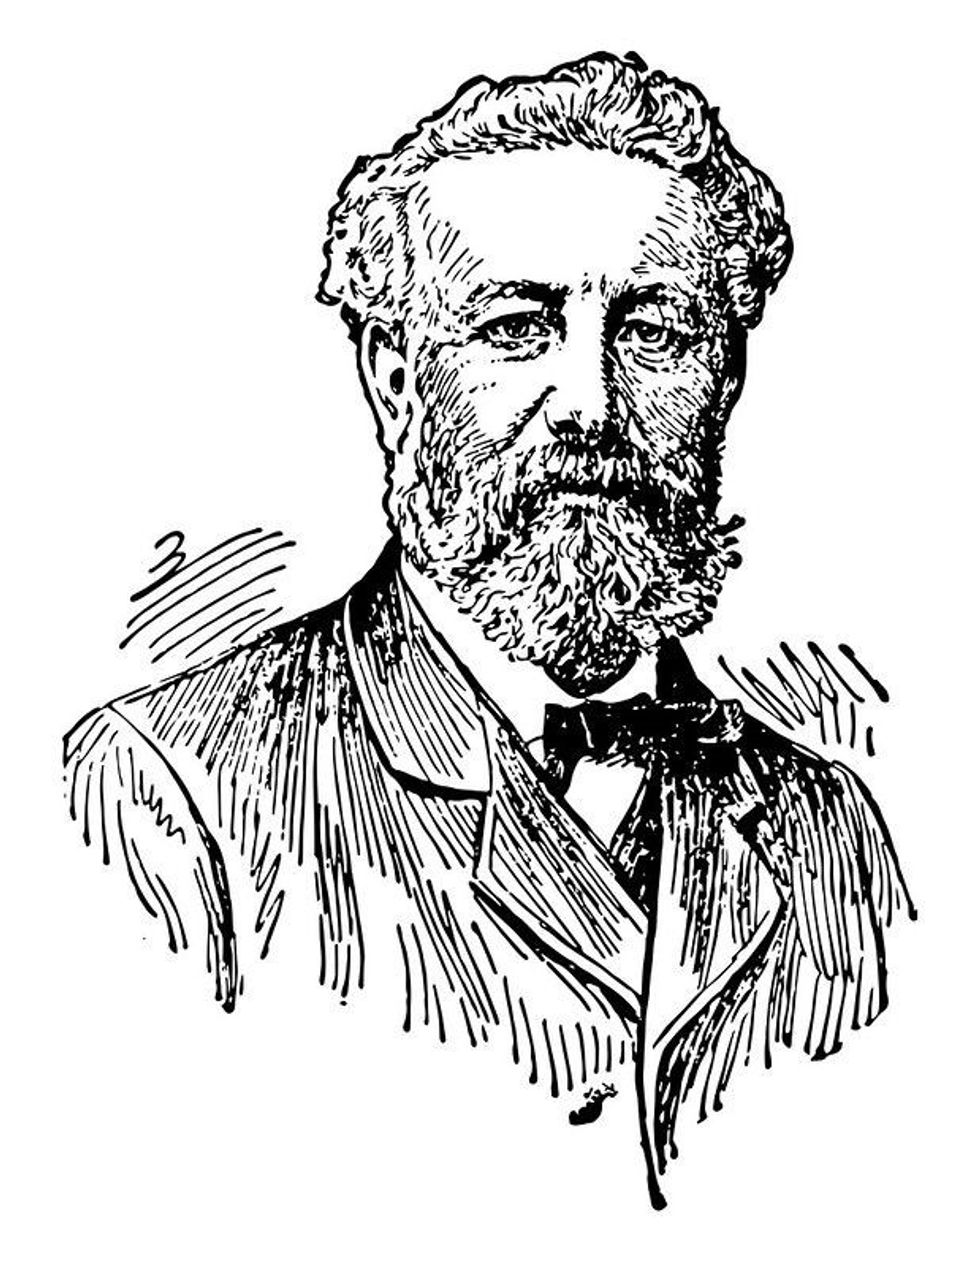 Continue reading to discover Jules Verne quotes.